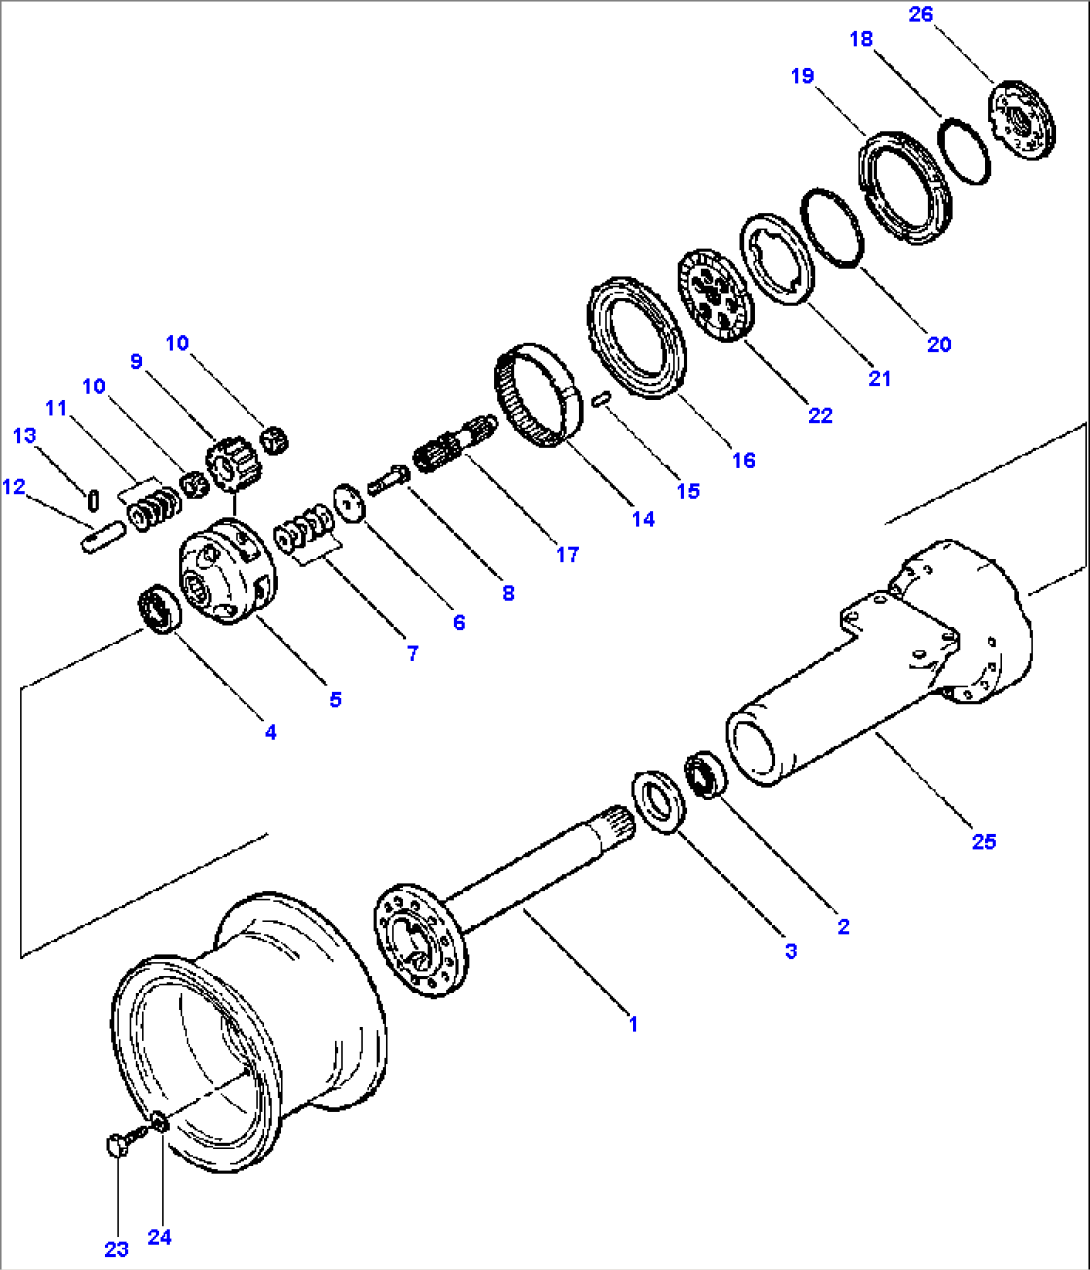 AXLE ASSEMBLY FRONT AND REAR FINAL DRIVE AND WHEEL BRAKE